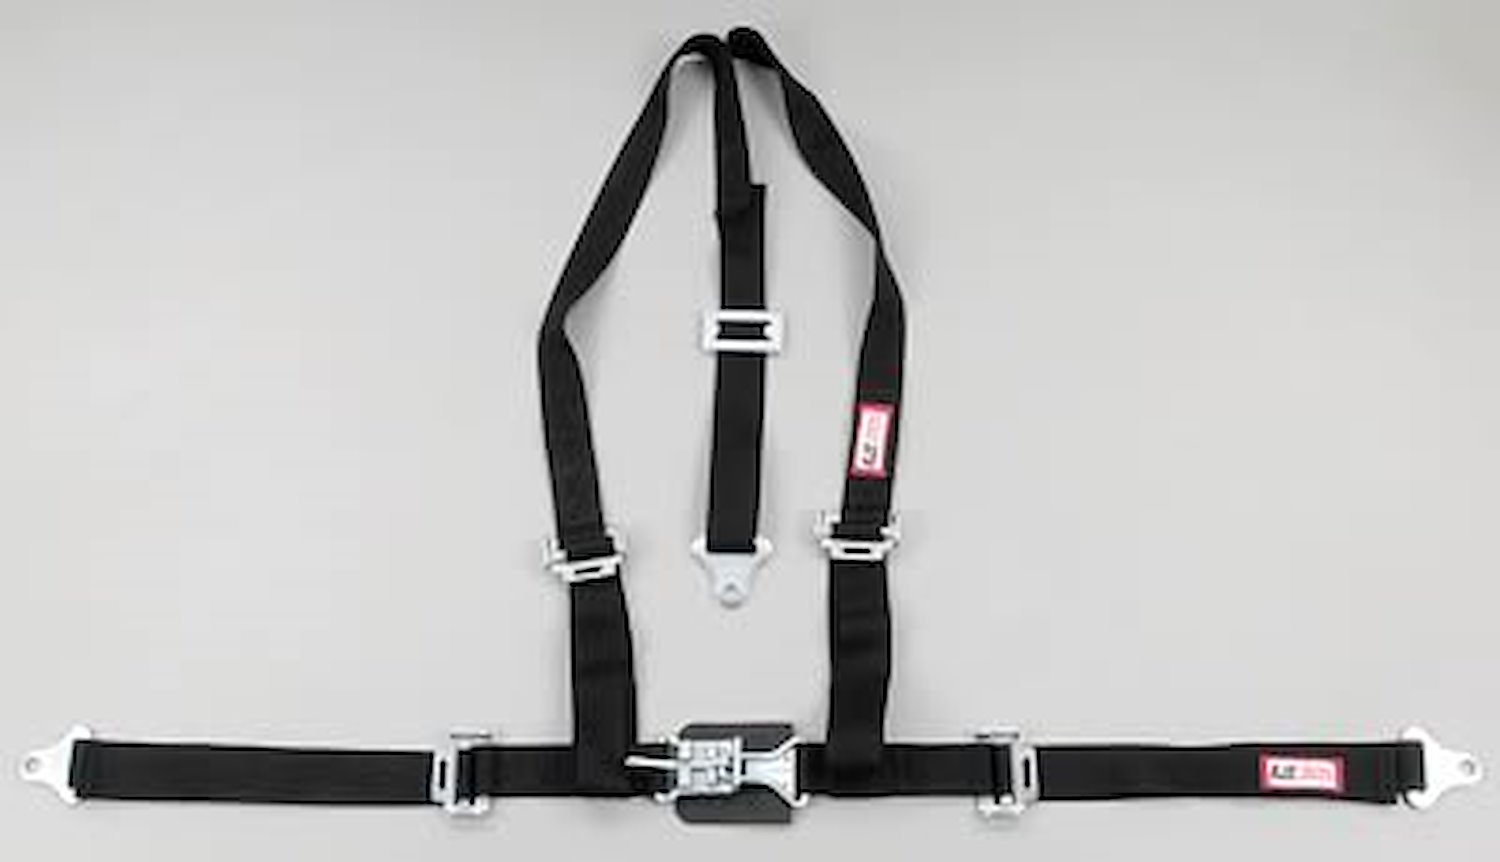 NON-SFI L&L HARNESS 2 PULL UP Lap Belt SEWN IN 2 S.H. V ROLL BAR Mount w/STERNUM STRAP ALL SNAP ENDS BLACK